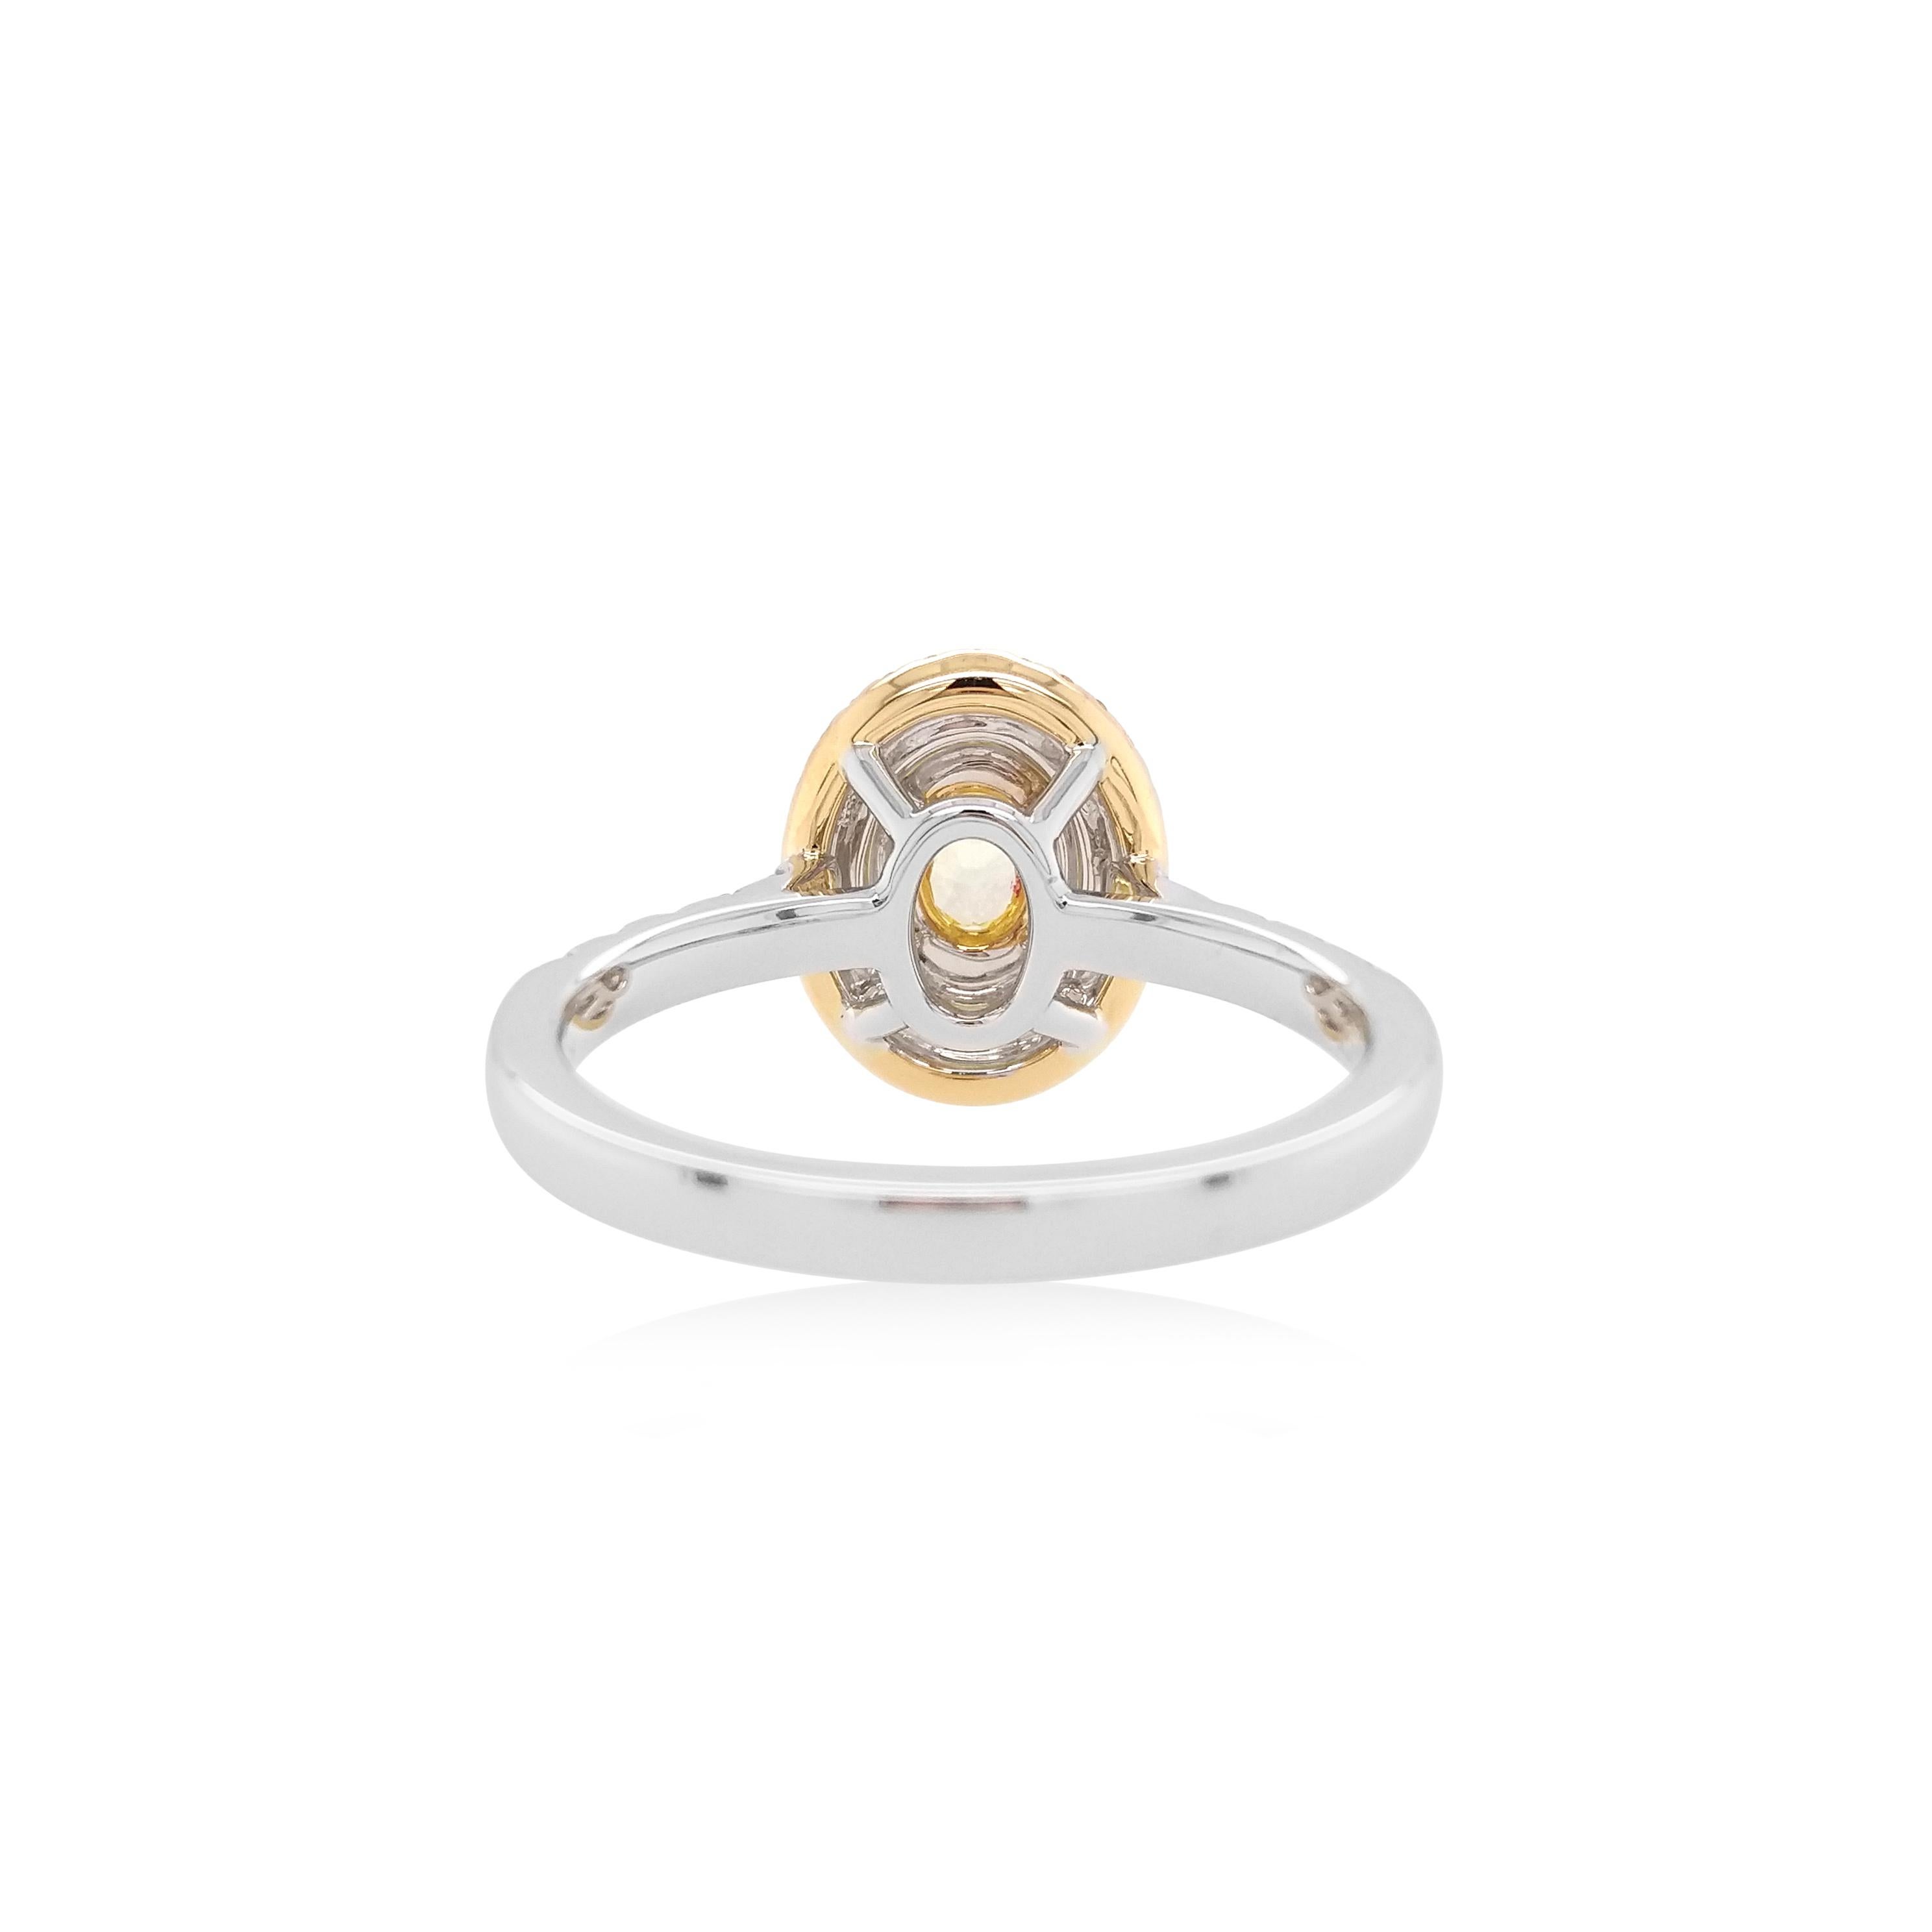 Natural Yellow Diamond Studded Ring with alternating Yellow diamond and white diamond halos. The ring is an exemplary piece set in a rare Fancy Intense yellow diamond showcasing elegance and beauty
-	Natural Fancy Intense Yellow diamond, 0.198